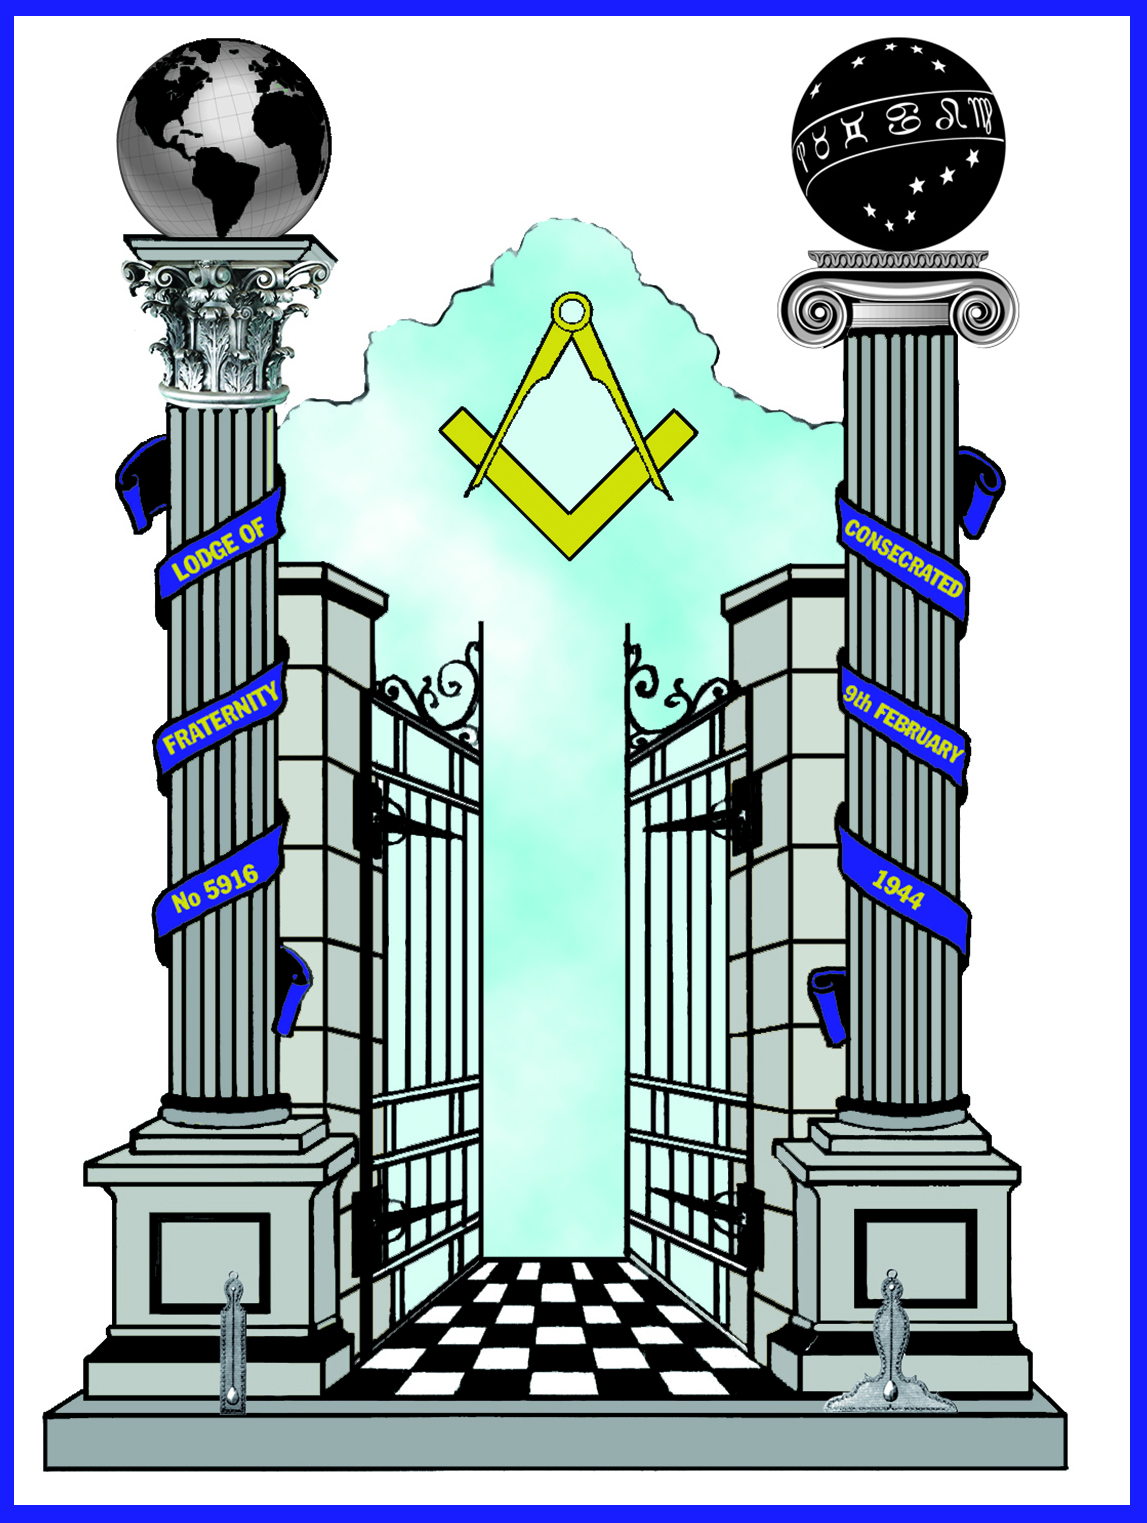 Lodge of Fraternity 5916